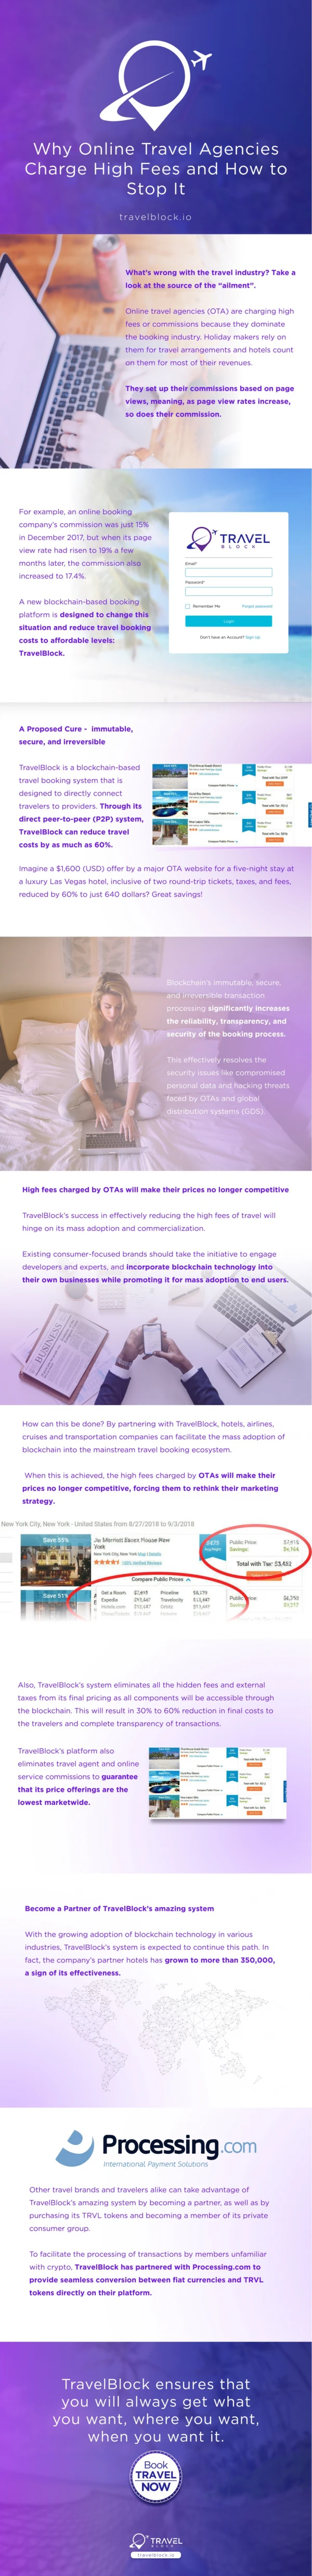 Why Travel Charge High Fees